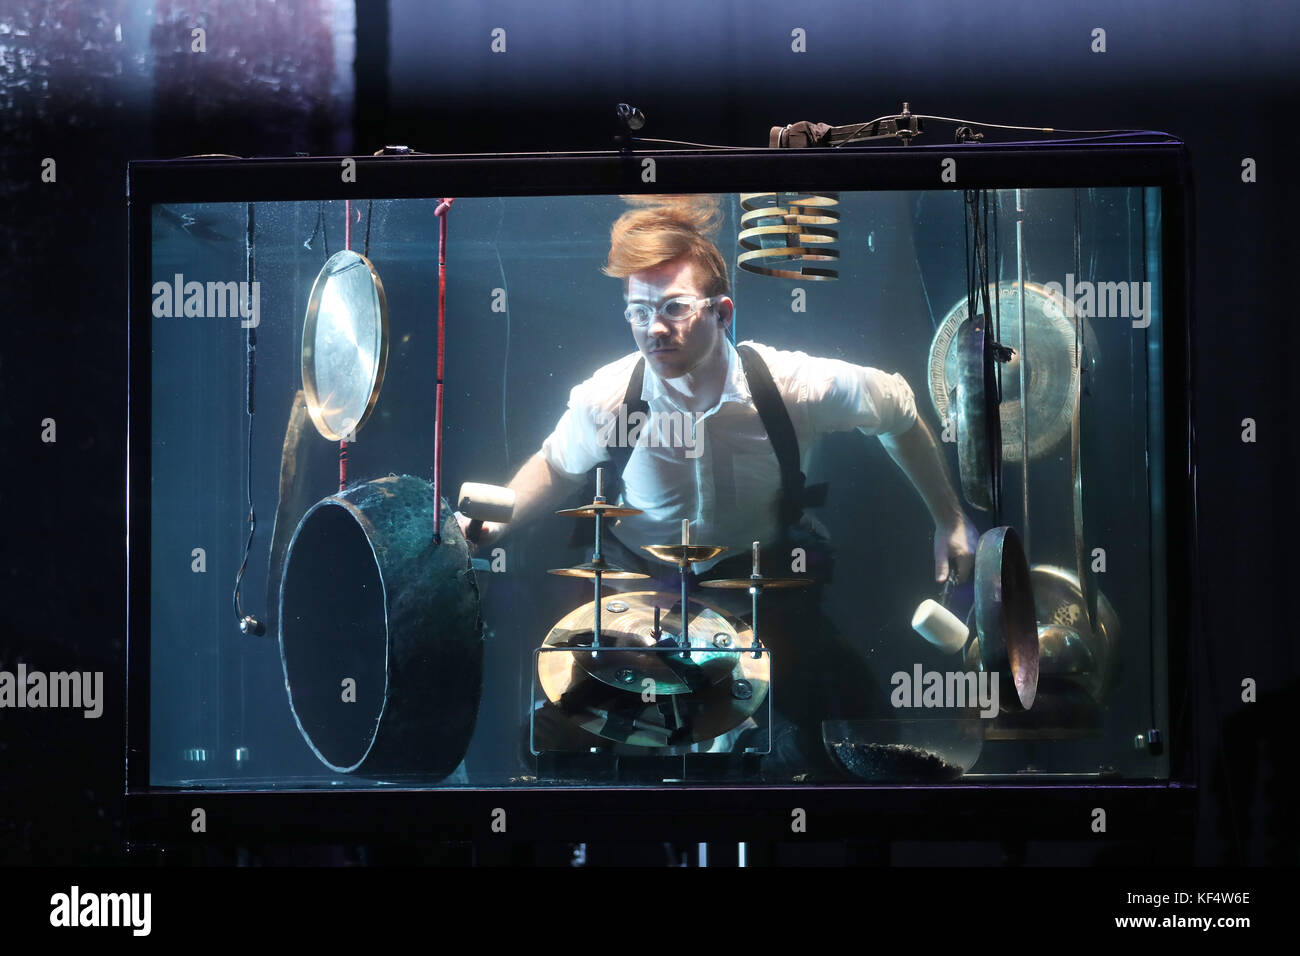 Percussionist Morten Poulsen, a musician with Danish company Between Music, plays underwater in a tank during a rehearsal ahead of their UK premiere concert Aquasonic at the Tramway in Glasgow. Stock Photo